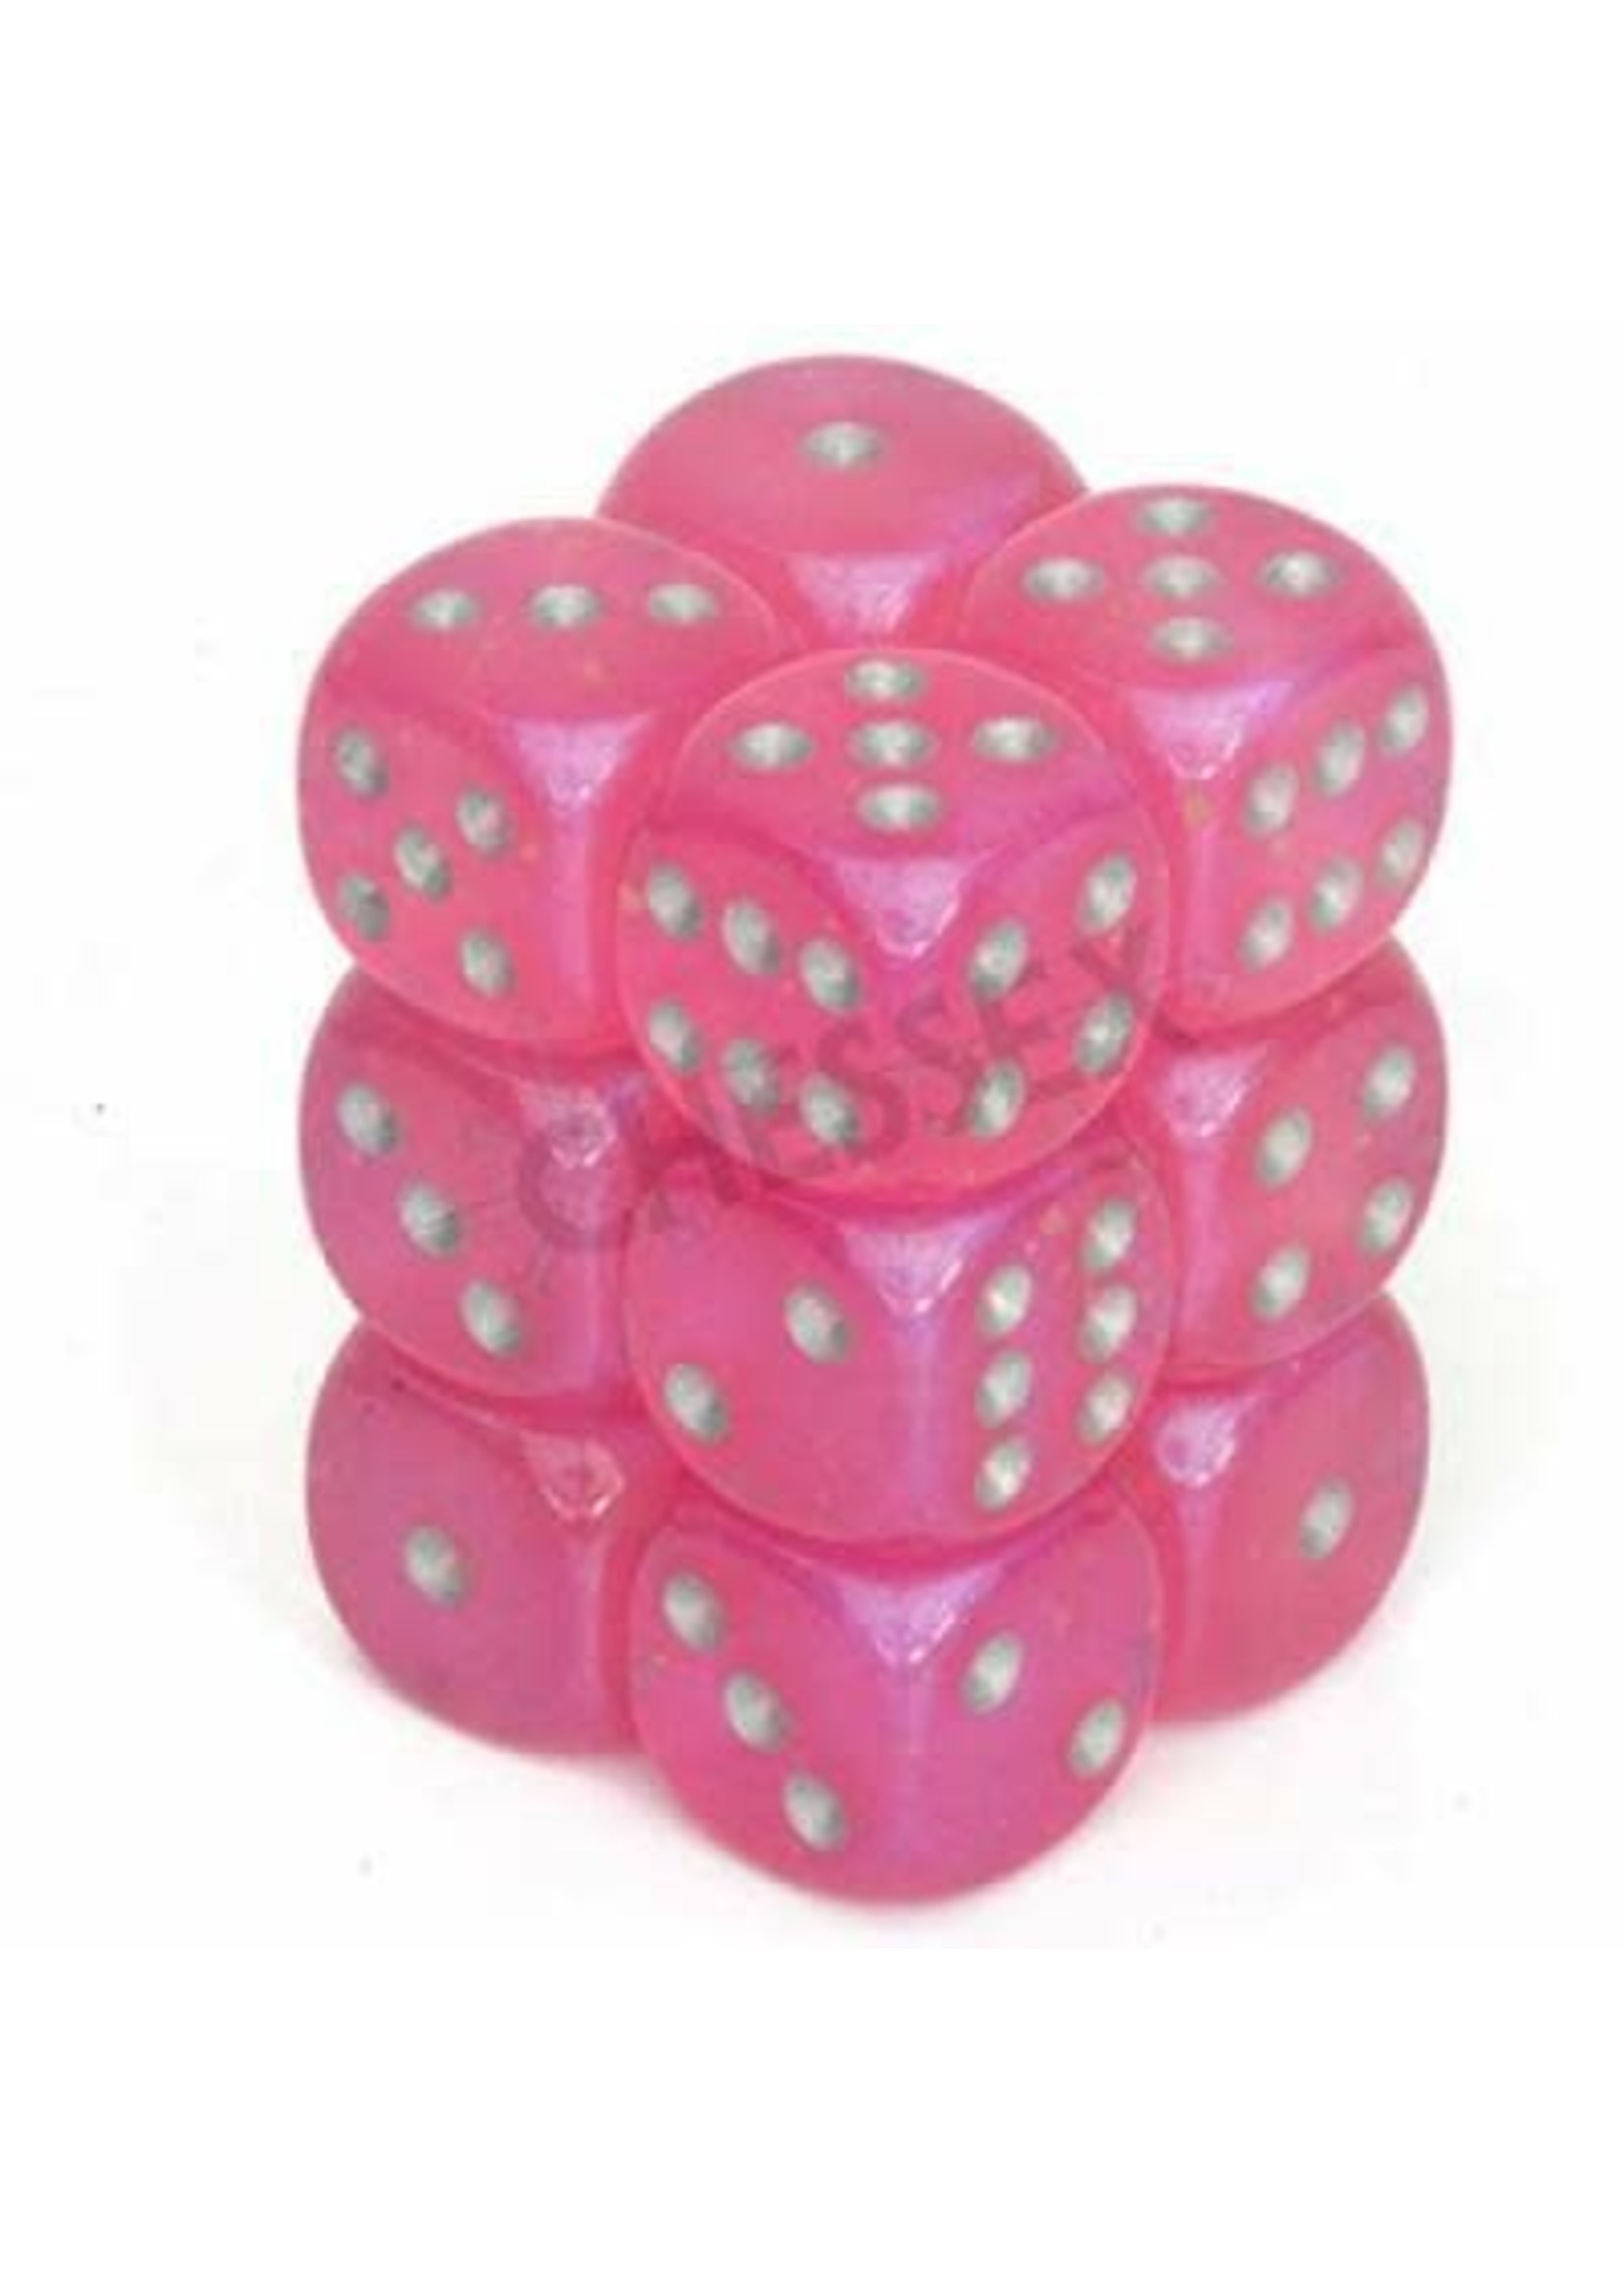 Chessex d6 Cube 16mm Borealis Luminary Pink w/ Silver (12)